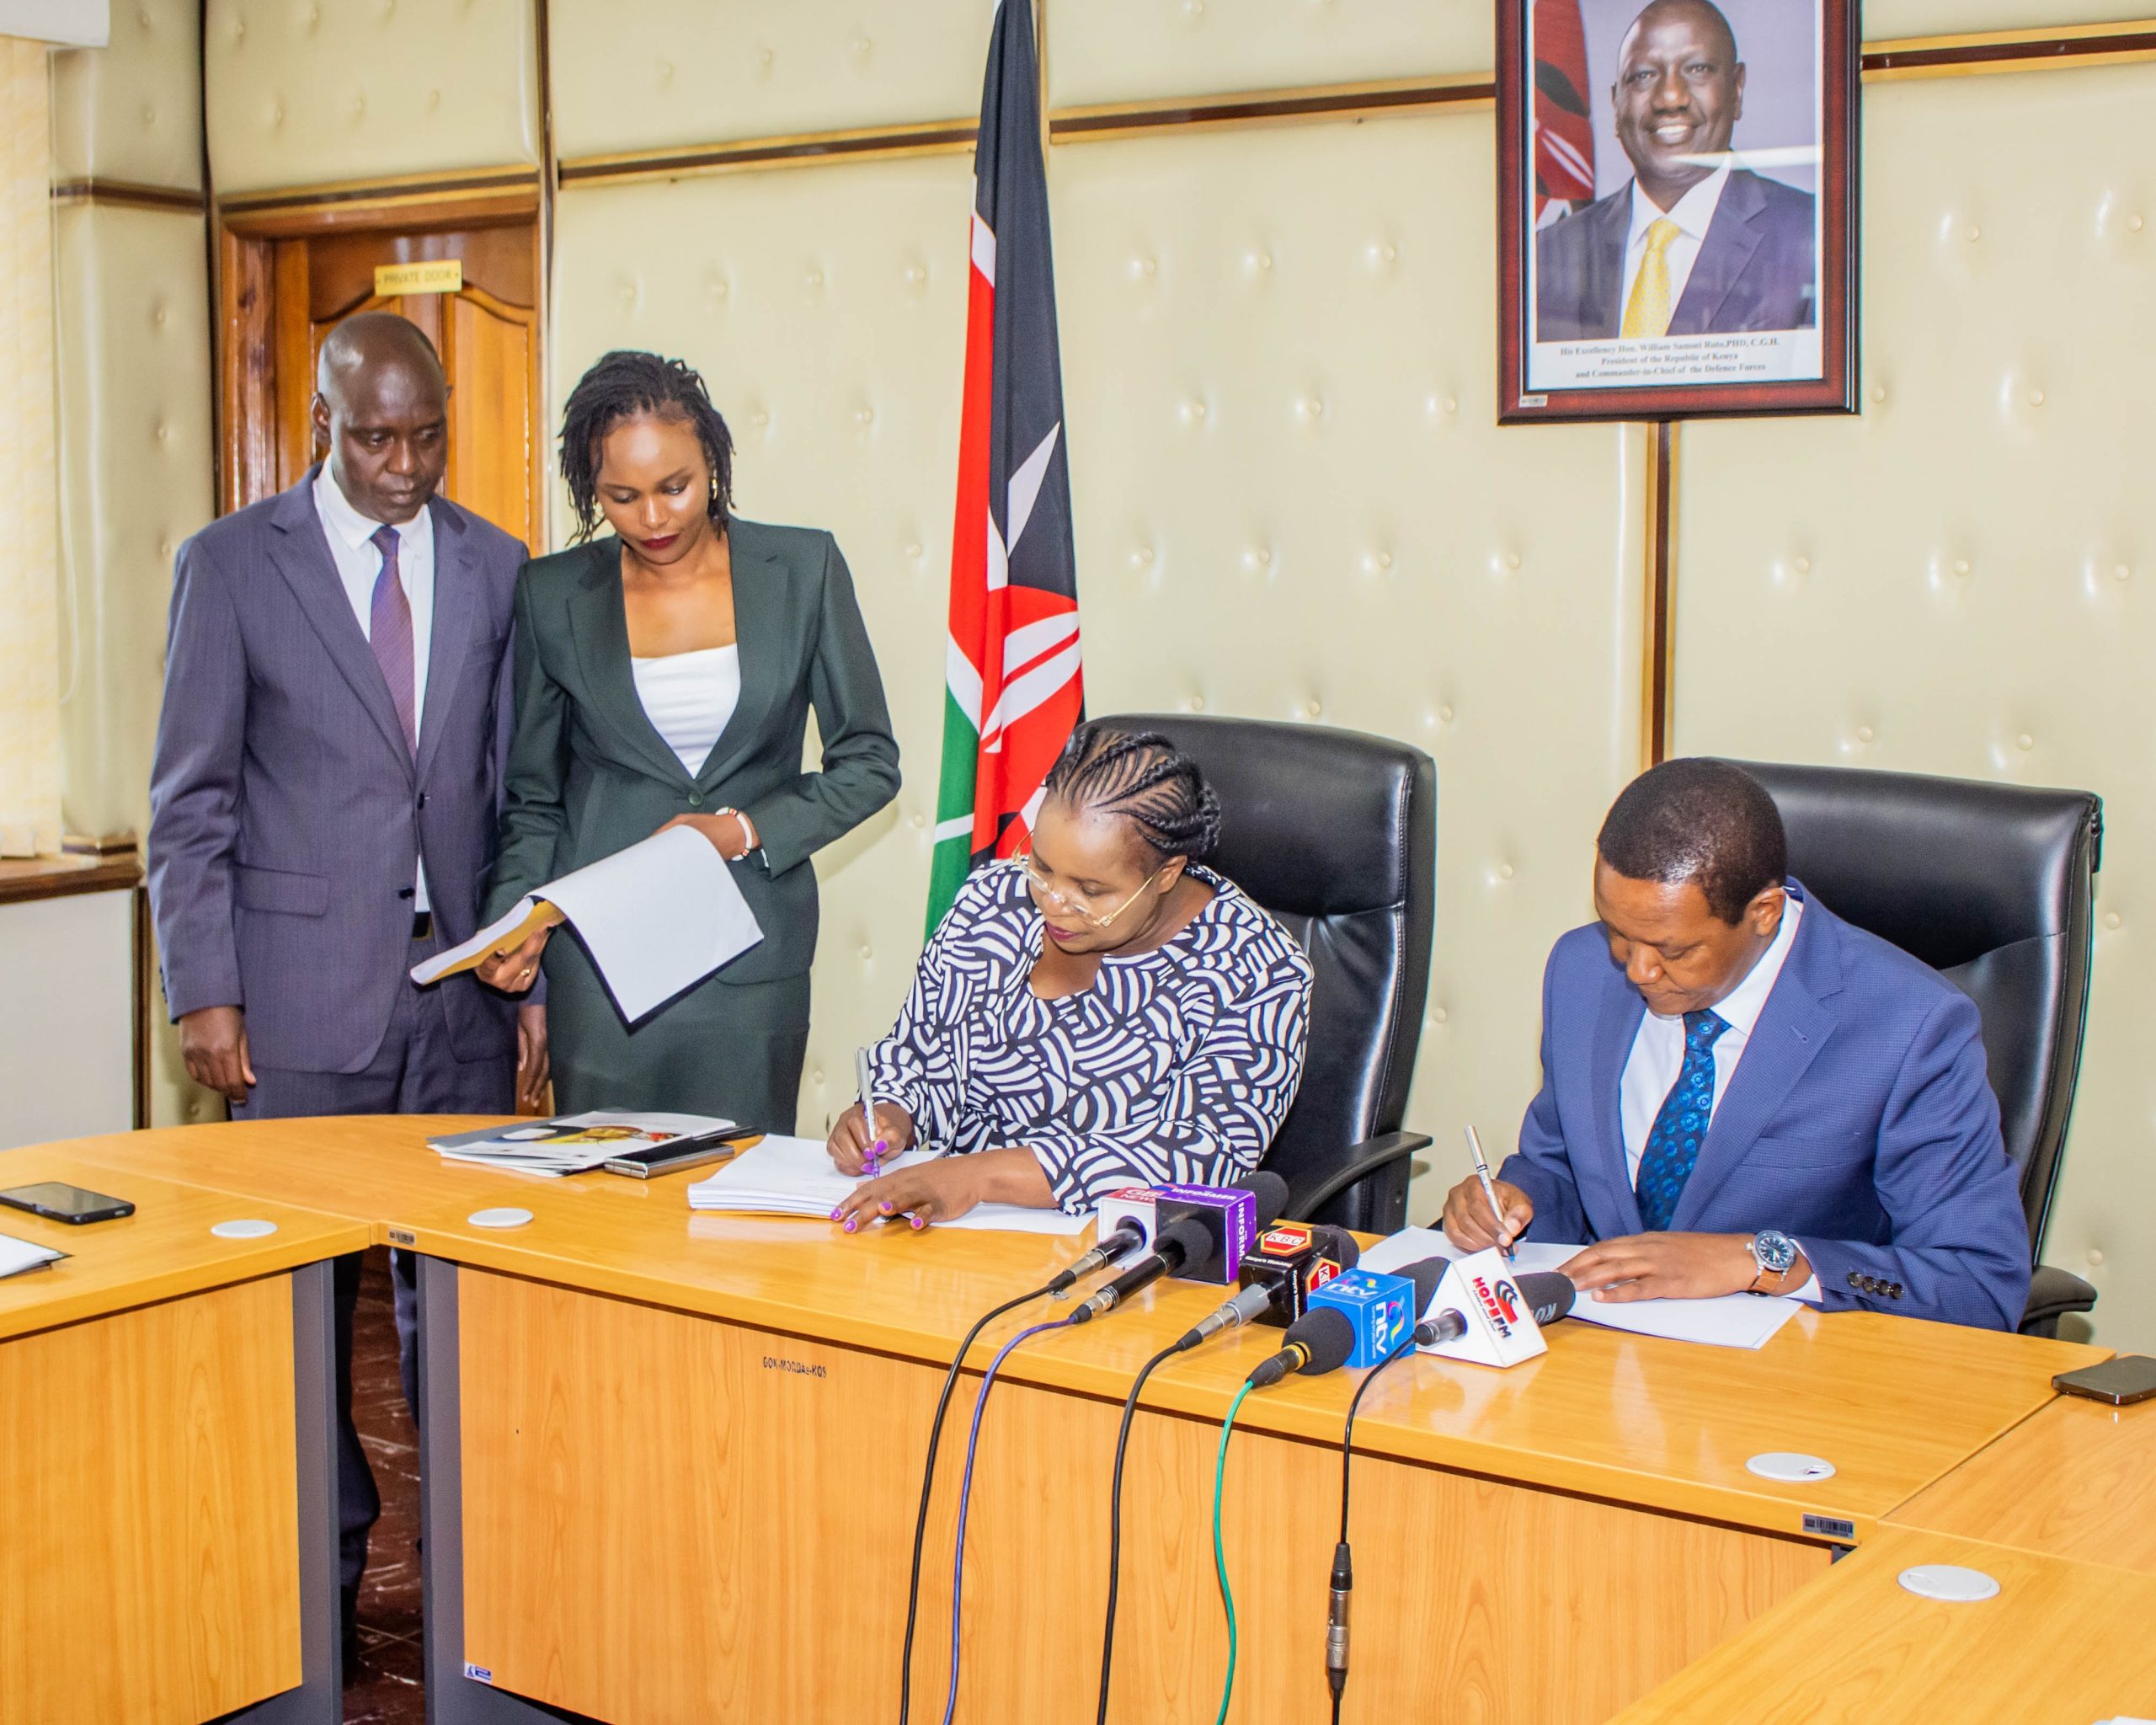 Outgoing Cabinet Secretary (CS) for Tourism and Wildlife Peninah Malonza (Seated Left and the in-coming CS, Dr Alfred Mutua (seated right) sign handing over-taking over notes following some Cabinet re-assignments. Looking on are Principal Secretaries (PS), John Ololtuaa (standing left) and Ms Silvia Museiya (right) for Tourism and Wildlife respectively.